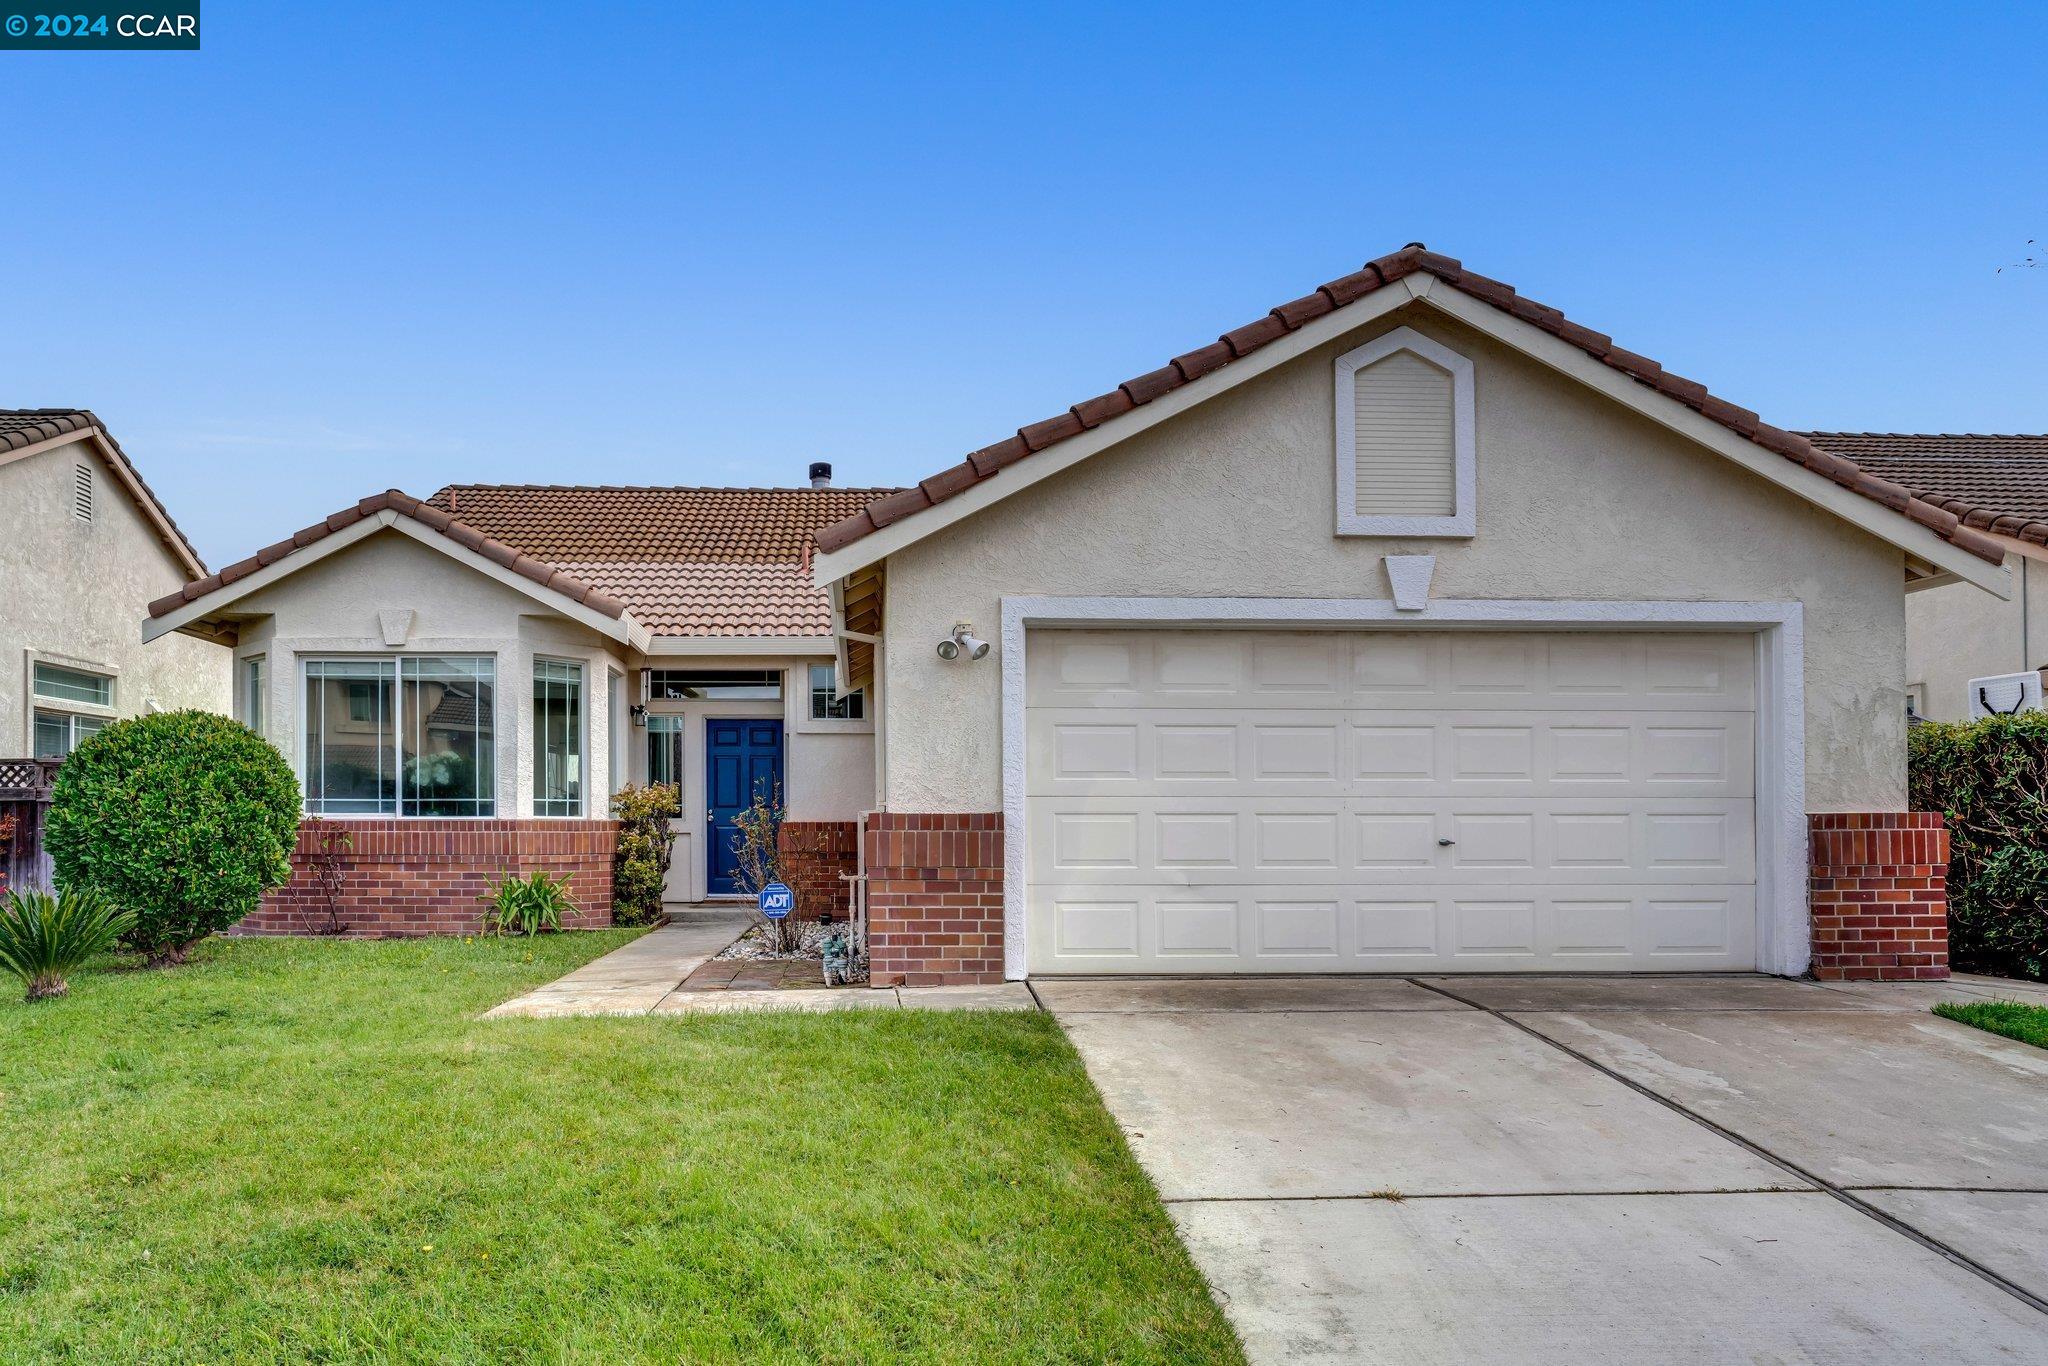 77 Houses for Rent in Palmdale, CA